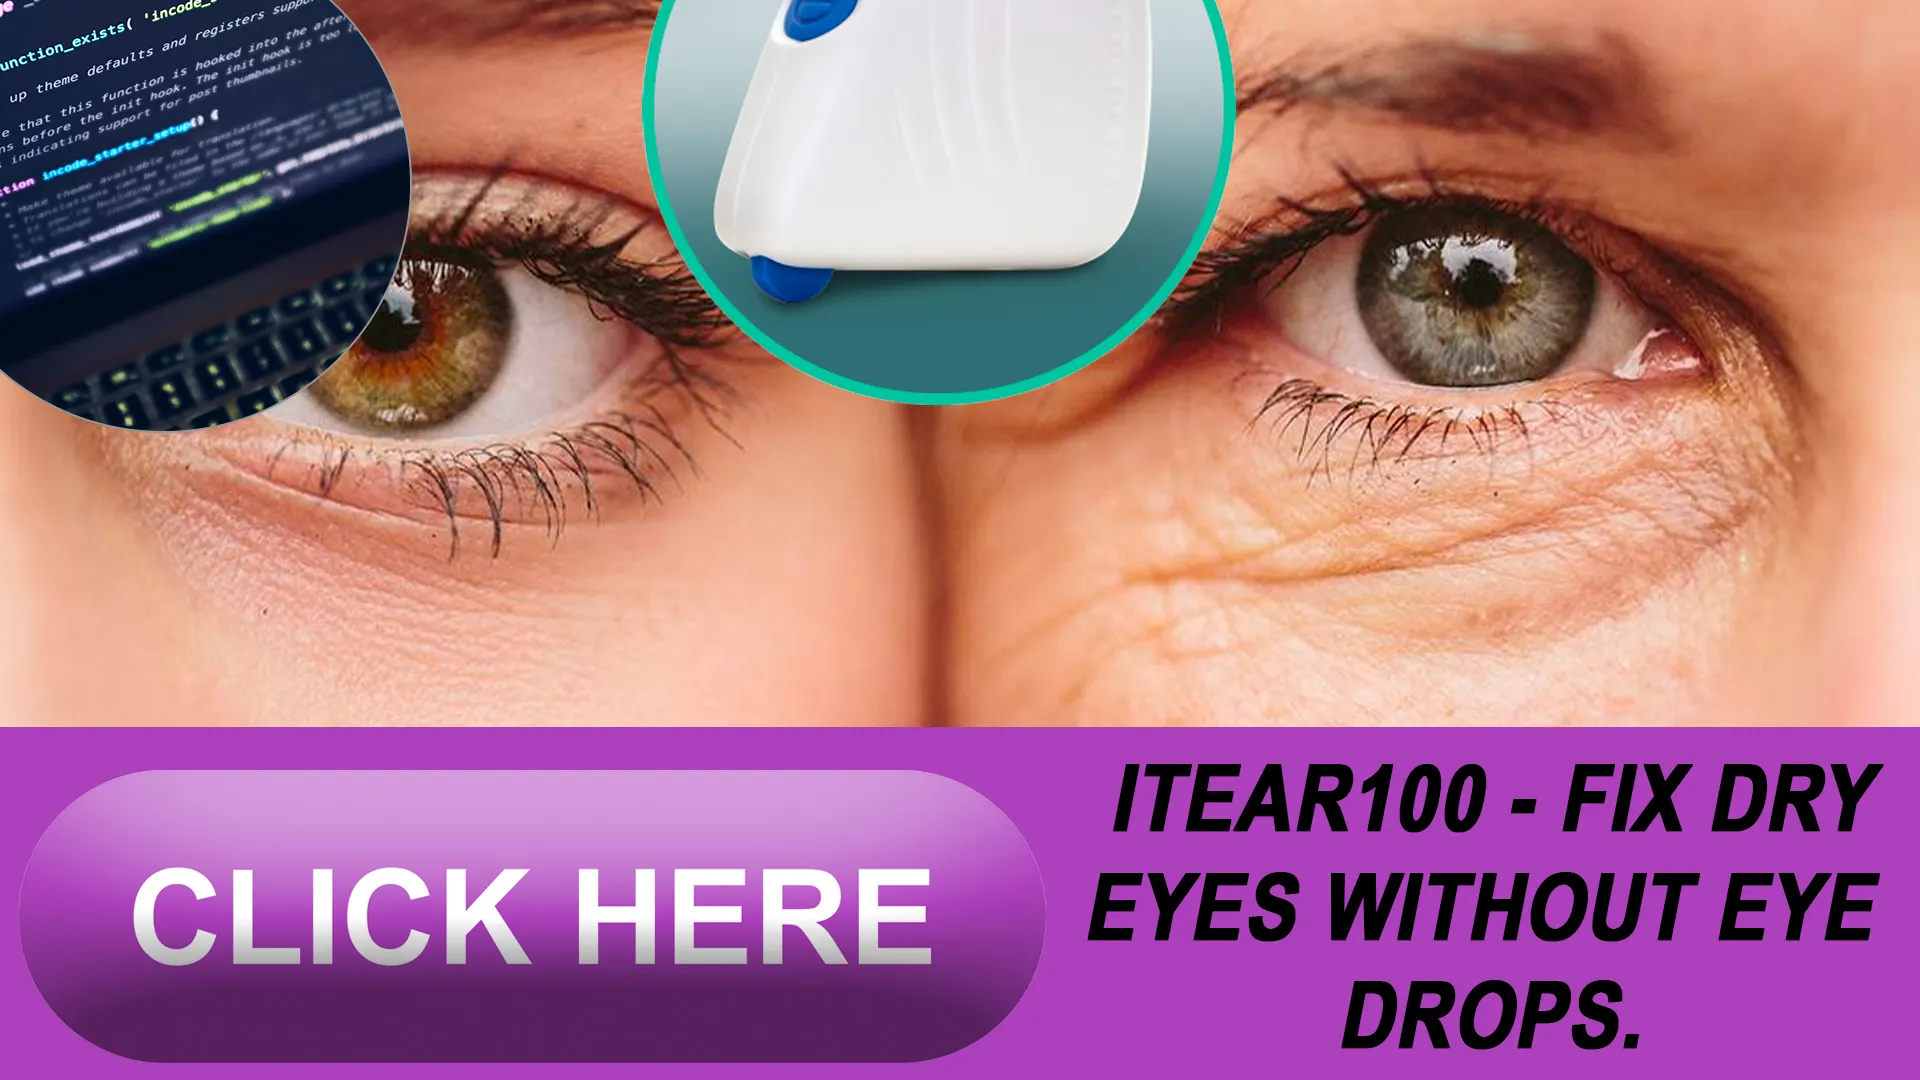 Achieving Total Eye Comfort